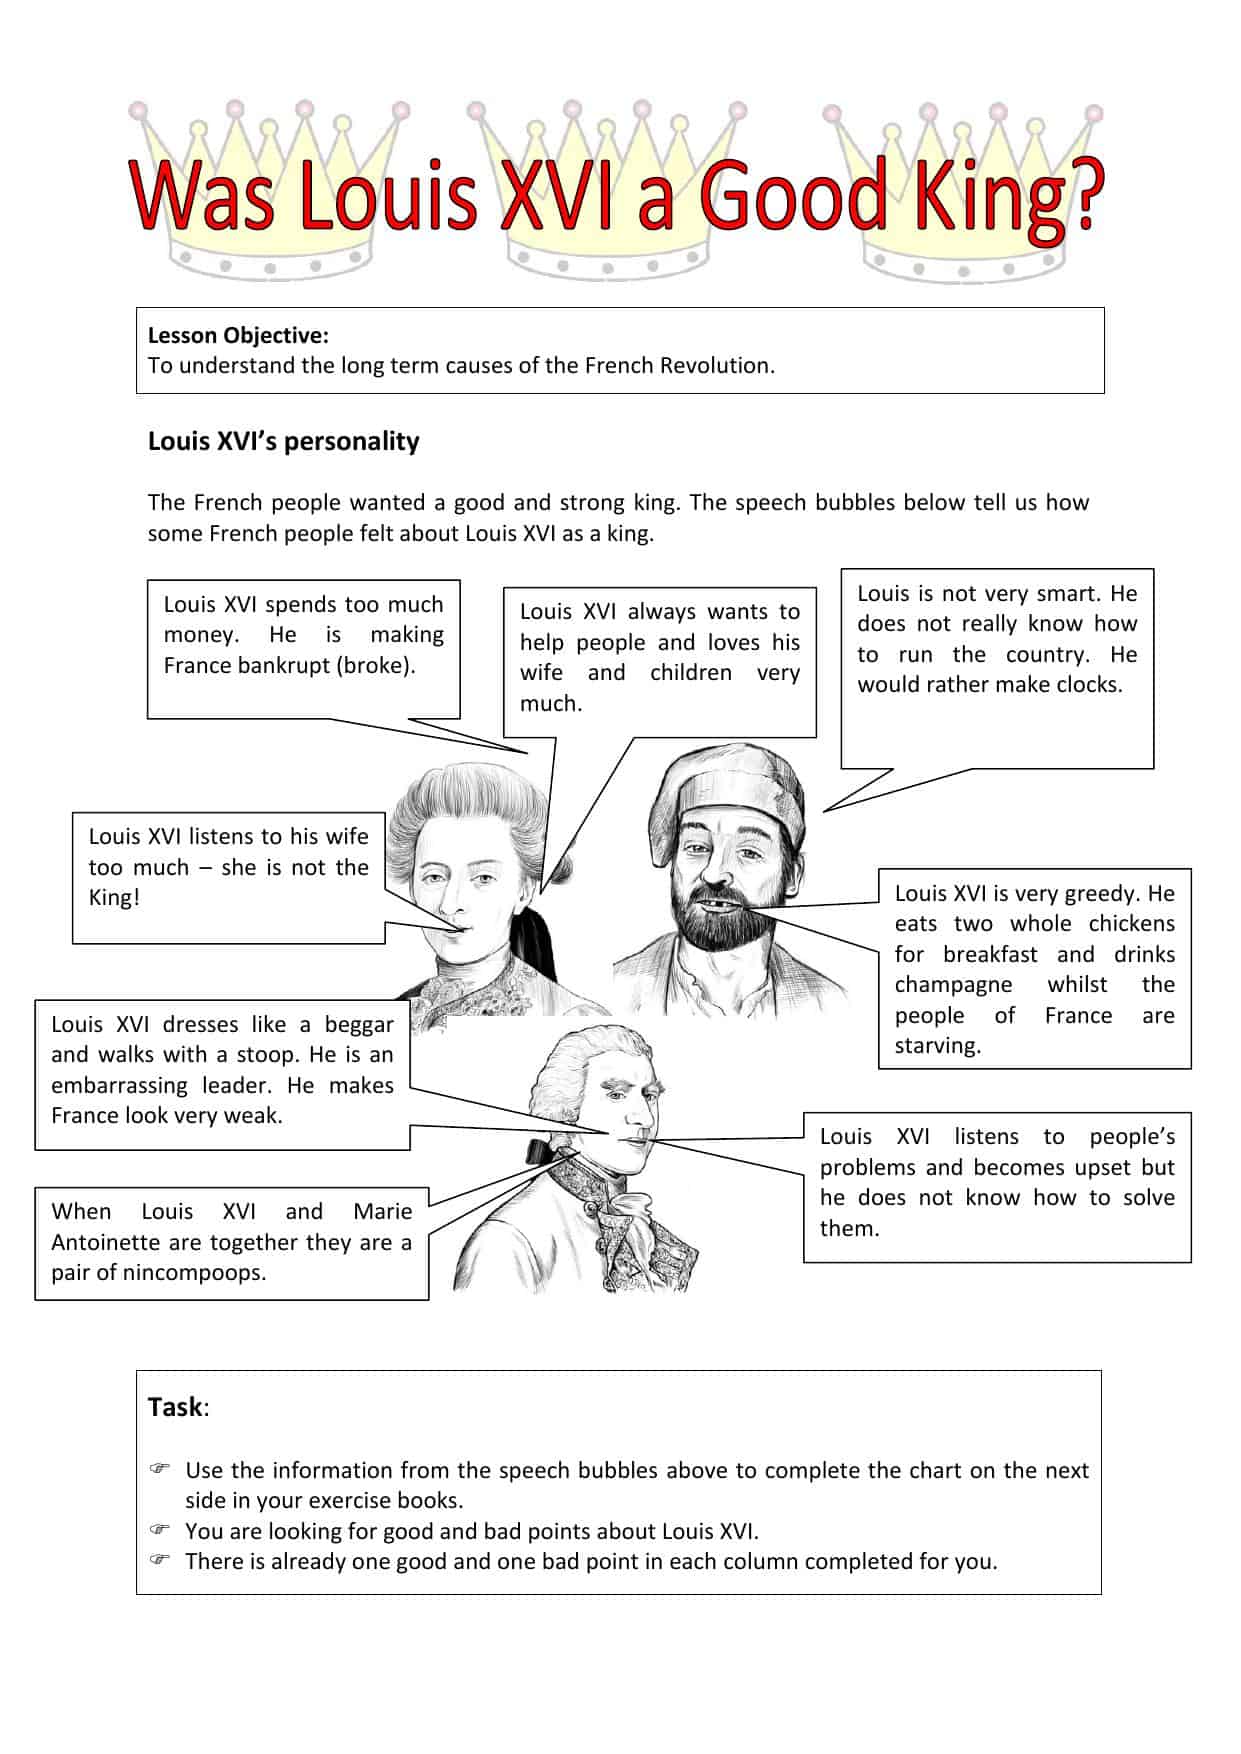 Did Louis XVI have the Qualities of a Good King Worksheet